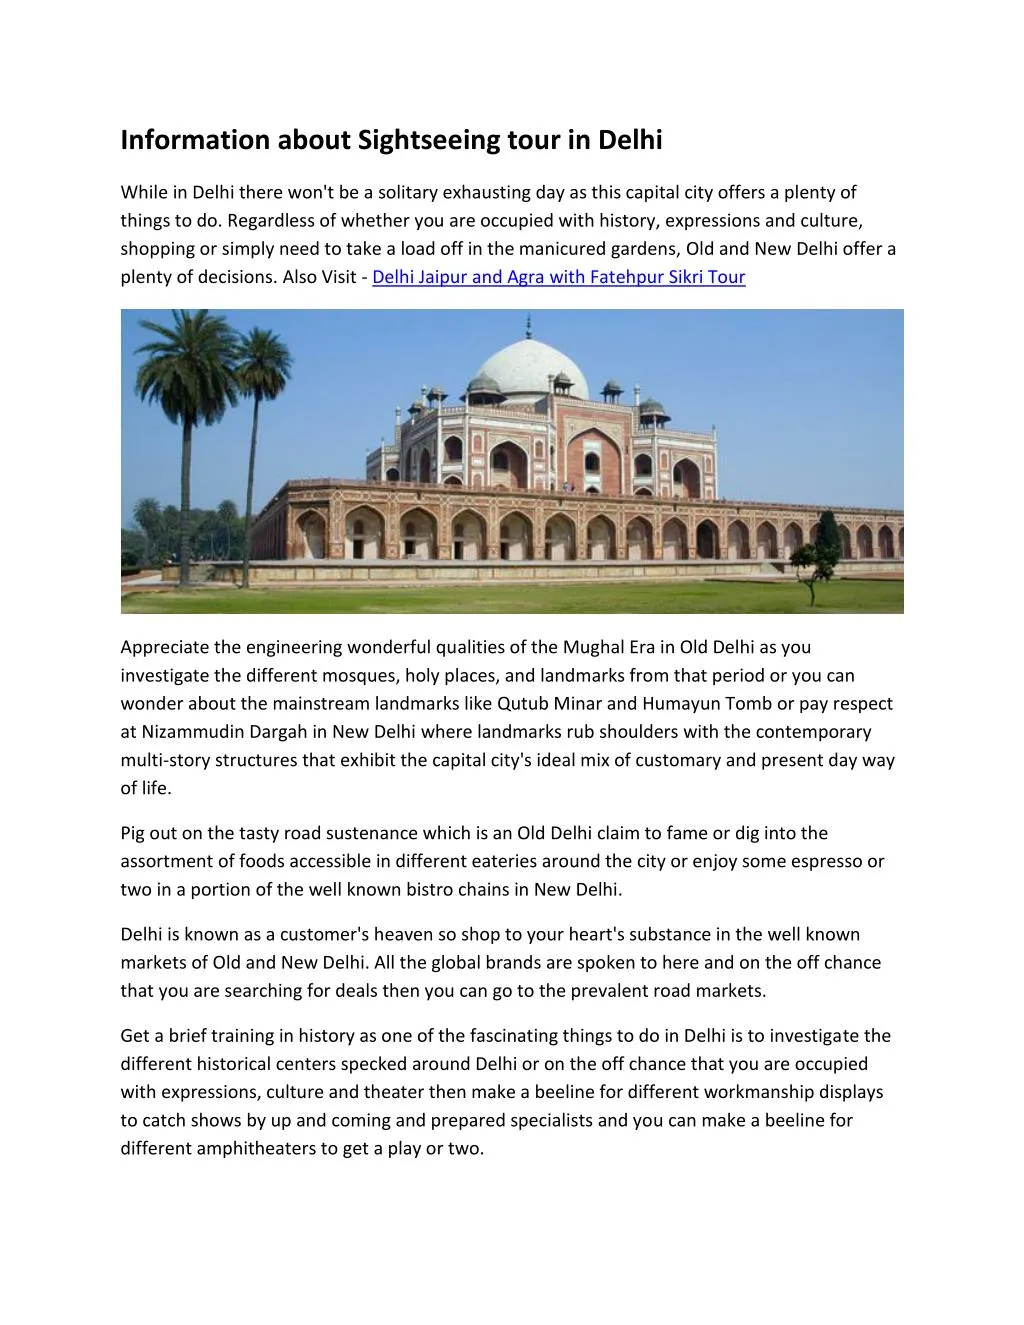 information about sightseeing tour in delhi